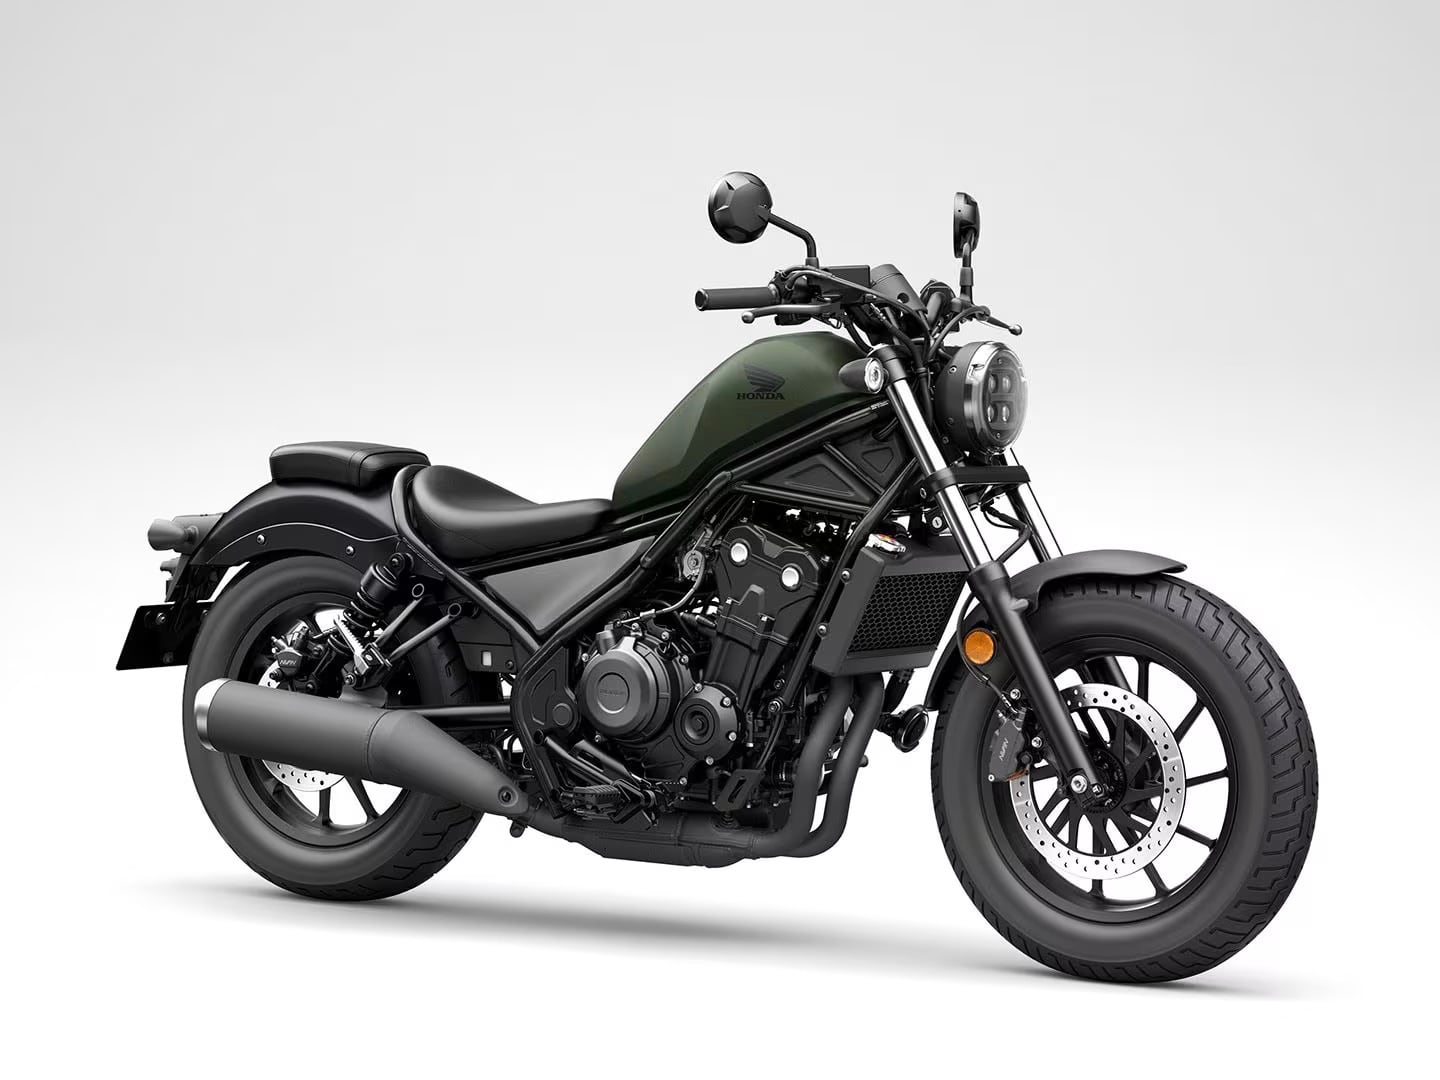 Despite its consistent excellence, the tried-and-true Honda Rebel (in both 300 and 500 varieties) is definitely going to have some competition very soon.